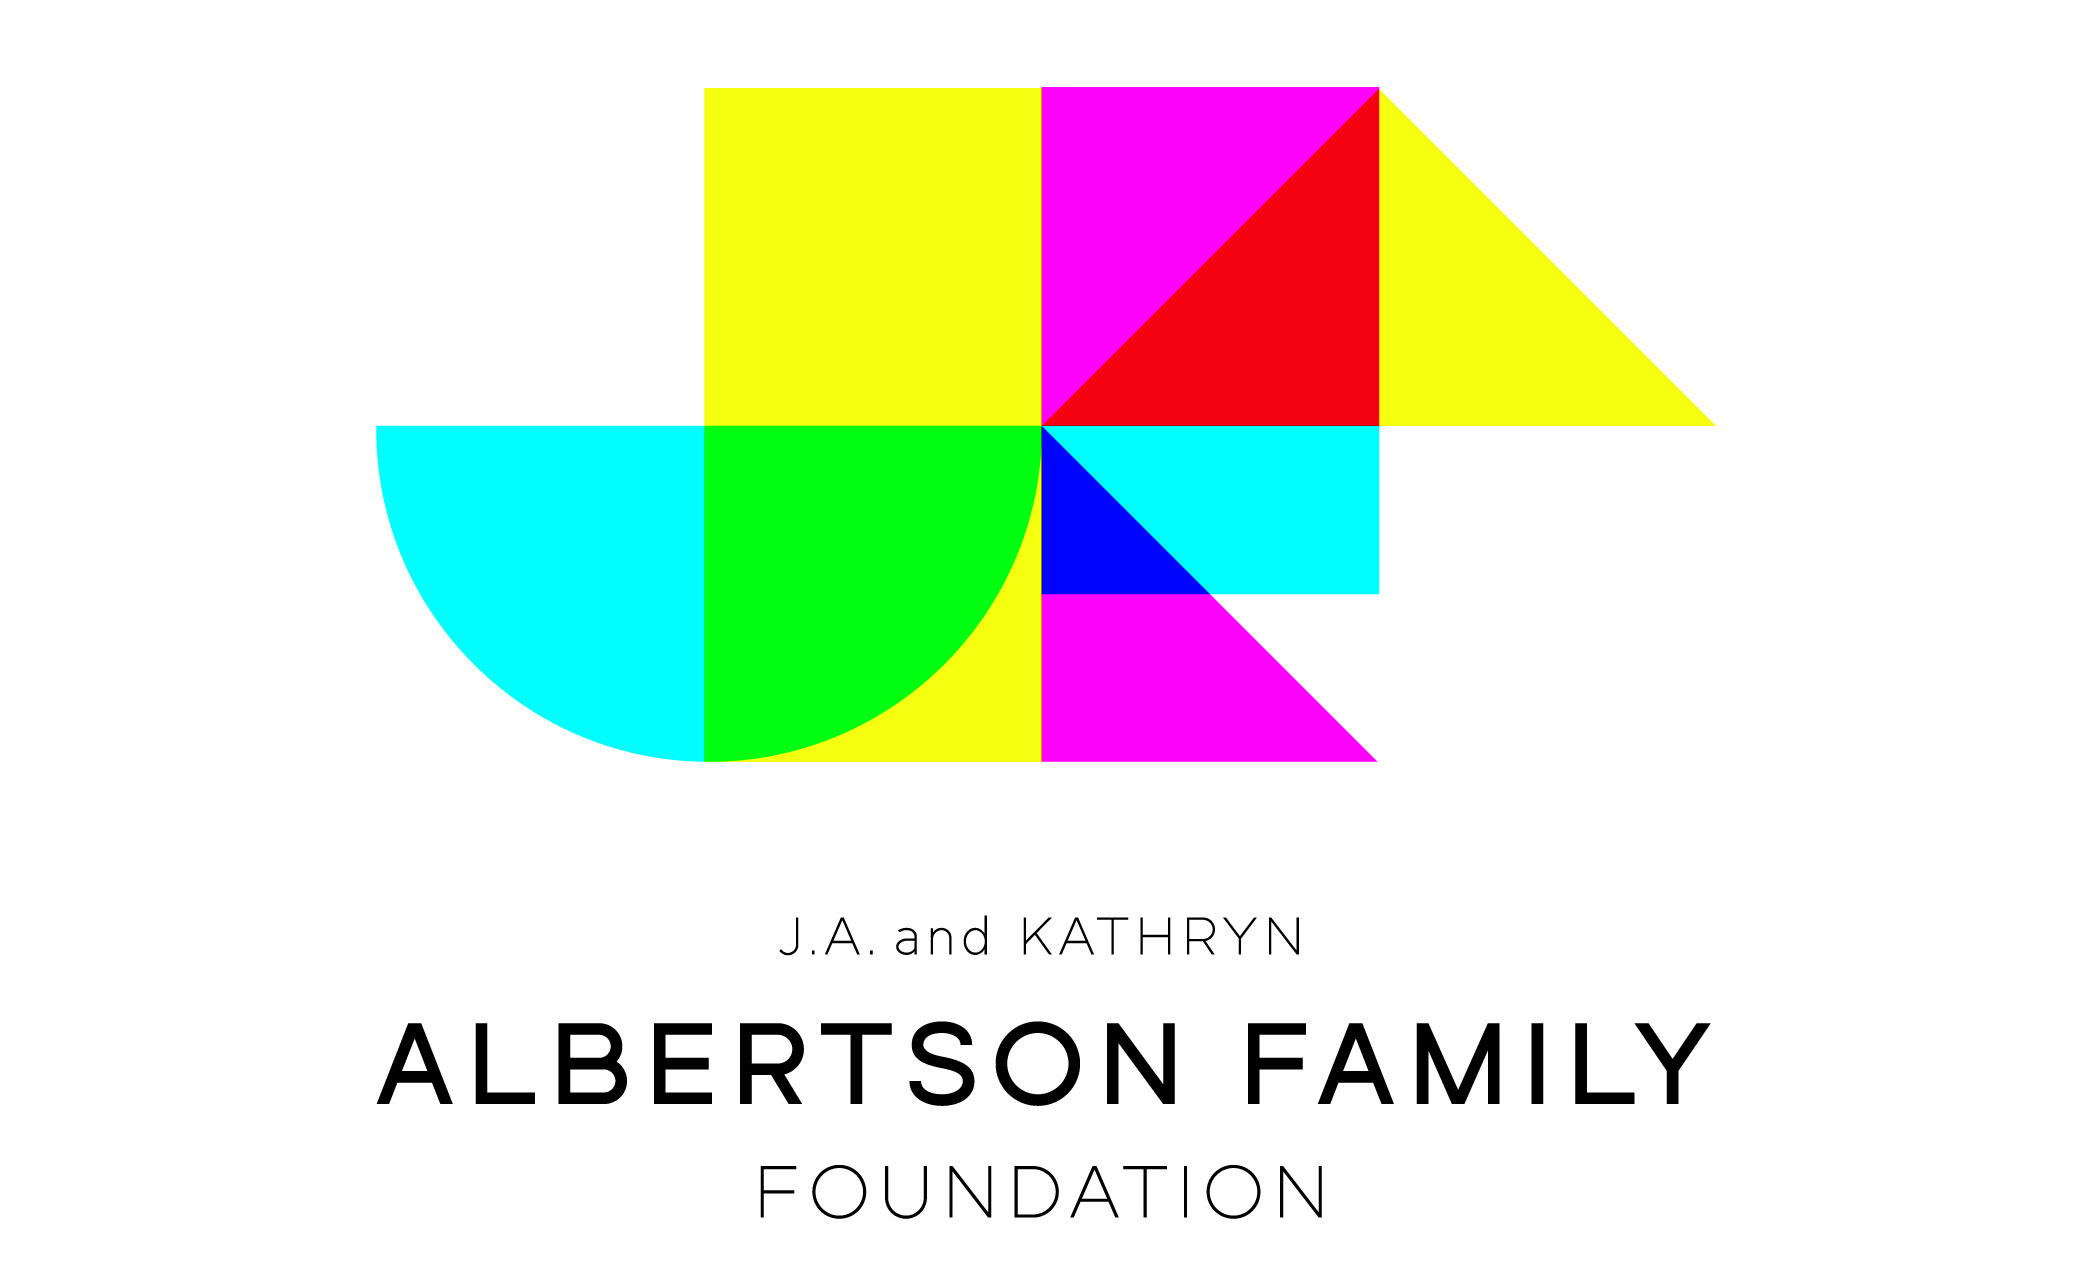 J.A. and Kathryn Albertson Family Foundation logo